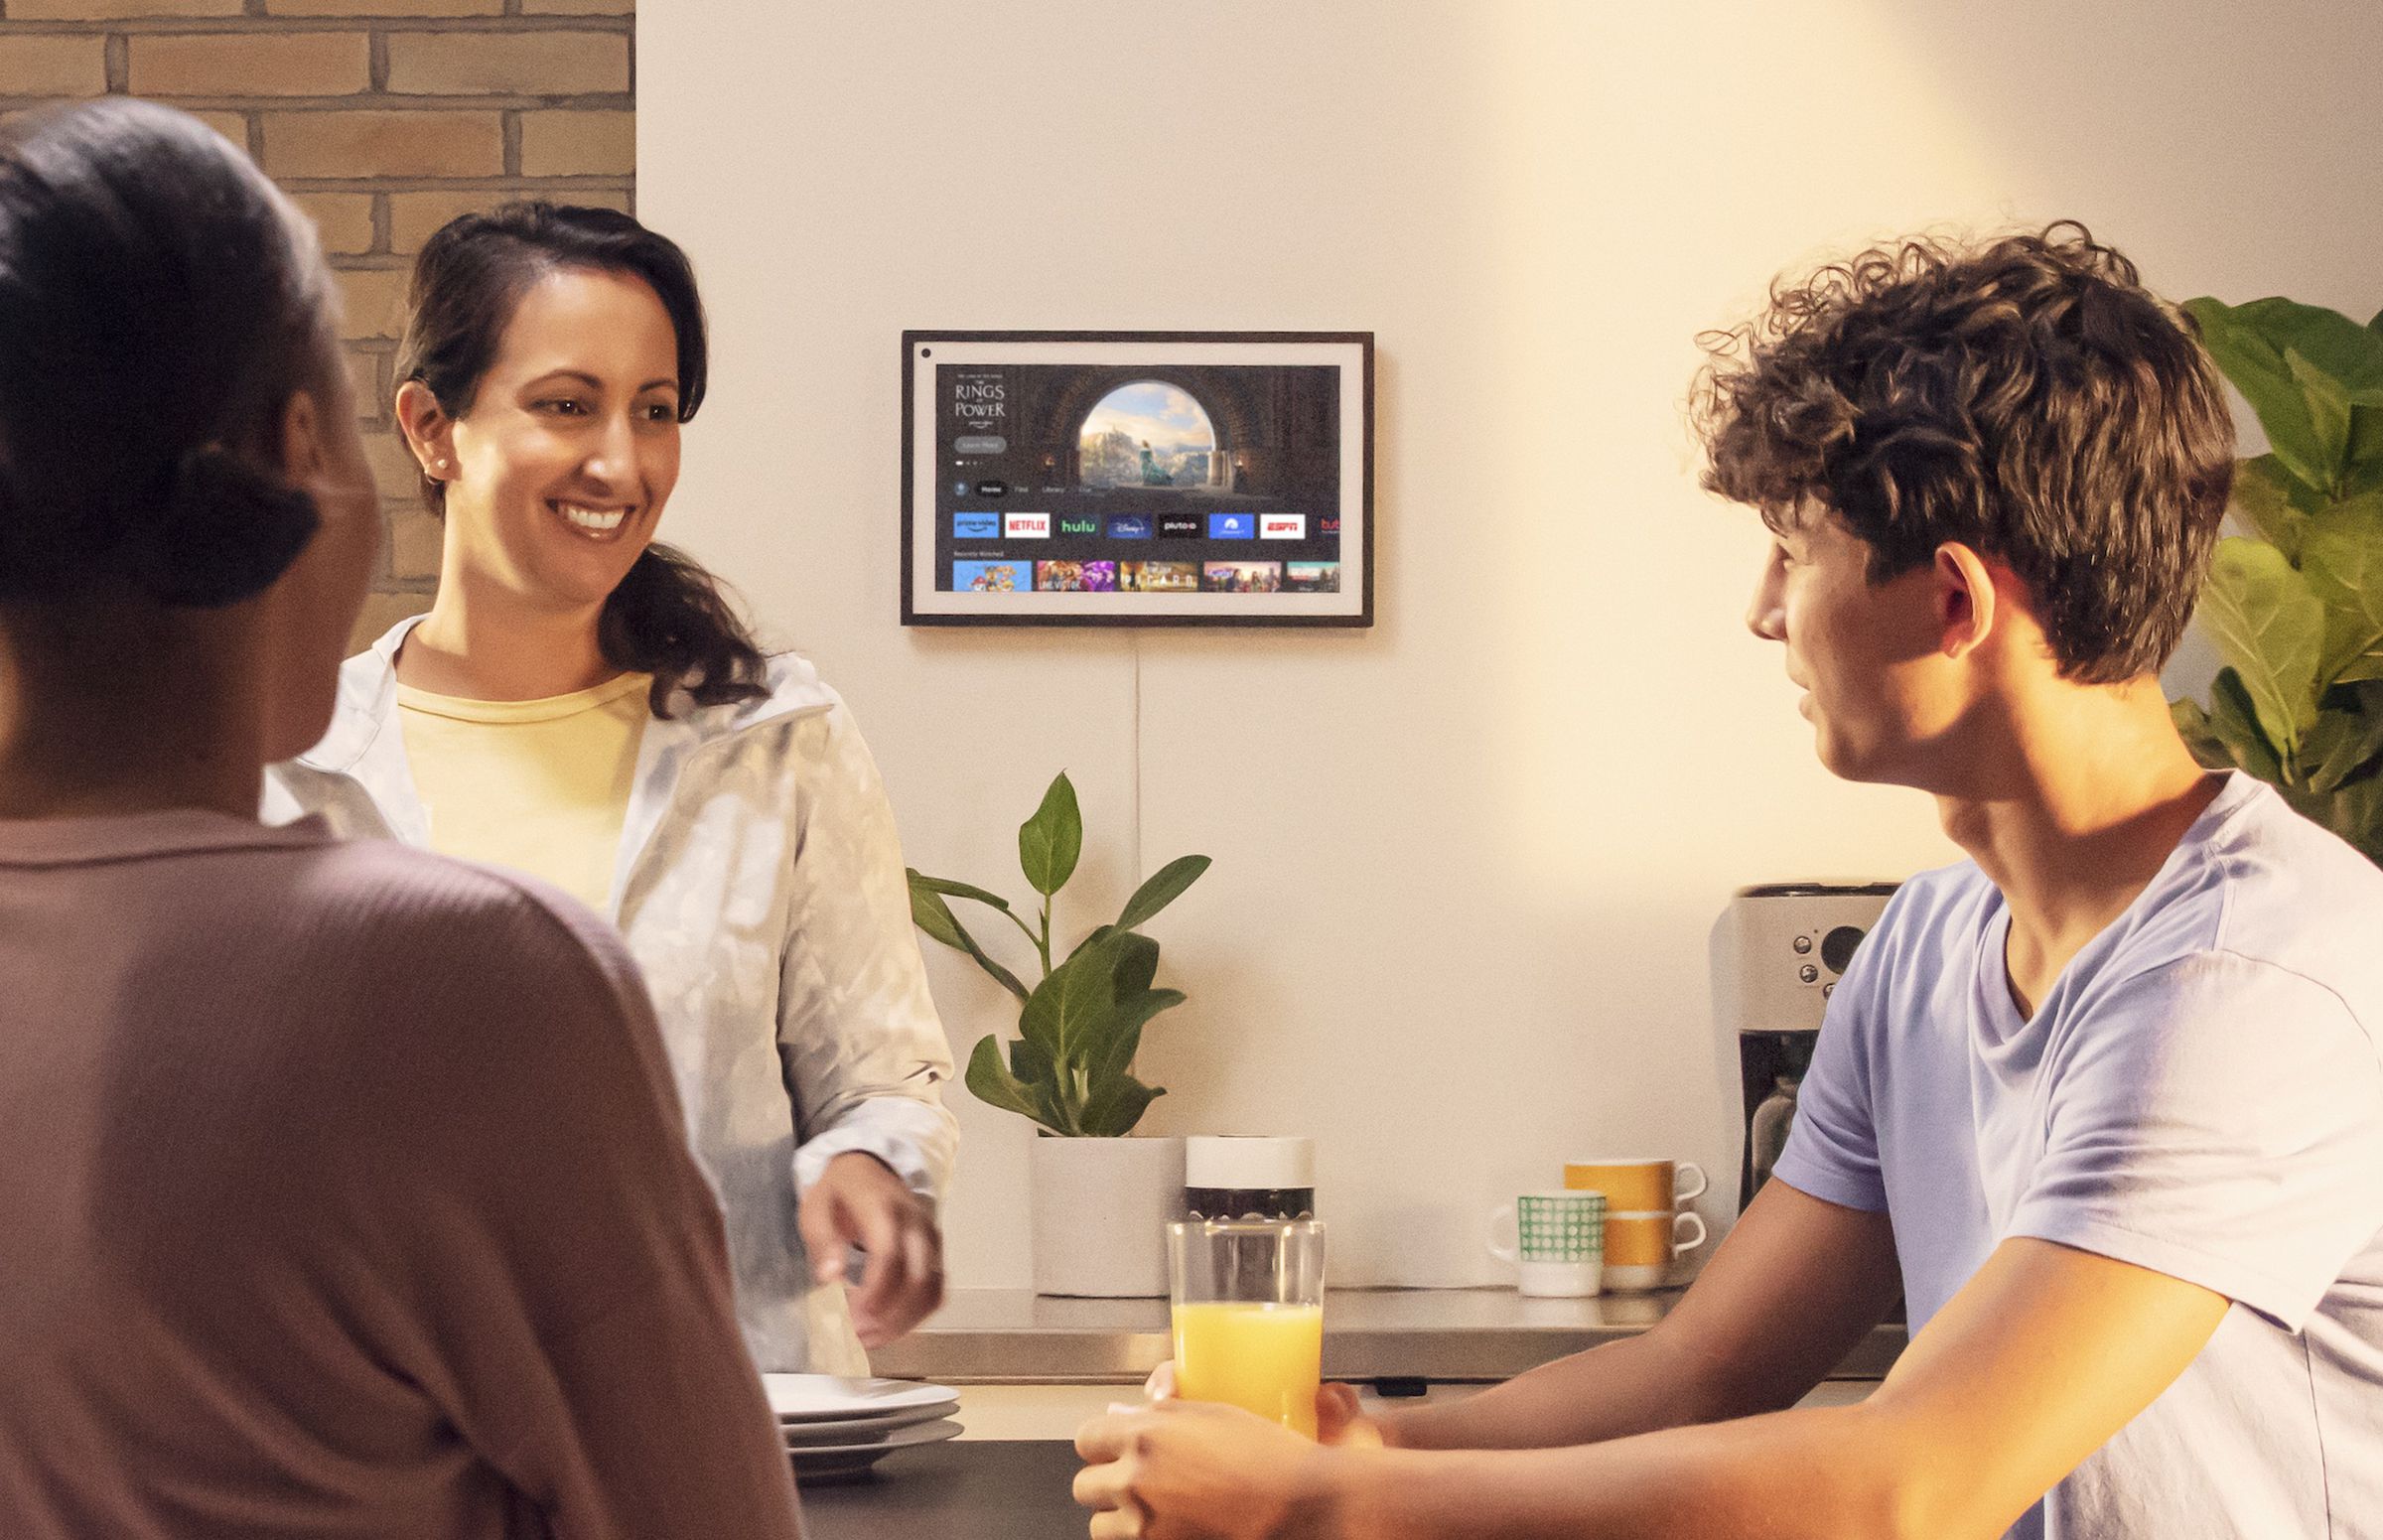 An image of an Echo Show 15 mounted to a wall running Amazon’s Fire TV OS. People are in the foreground having a conversation.